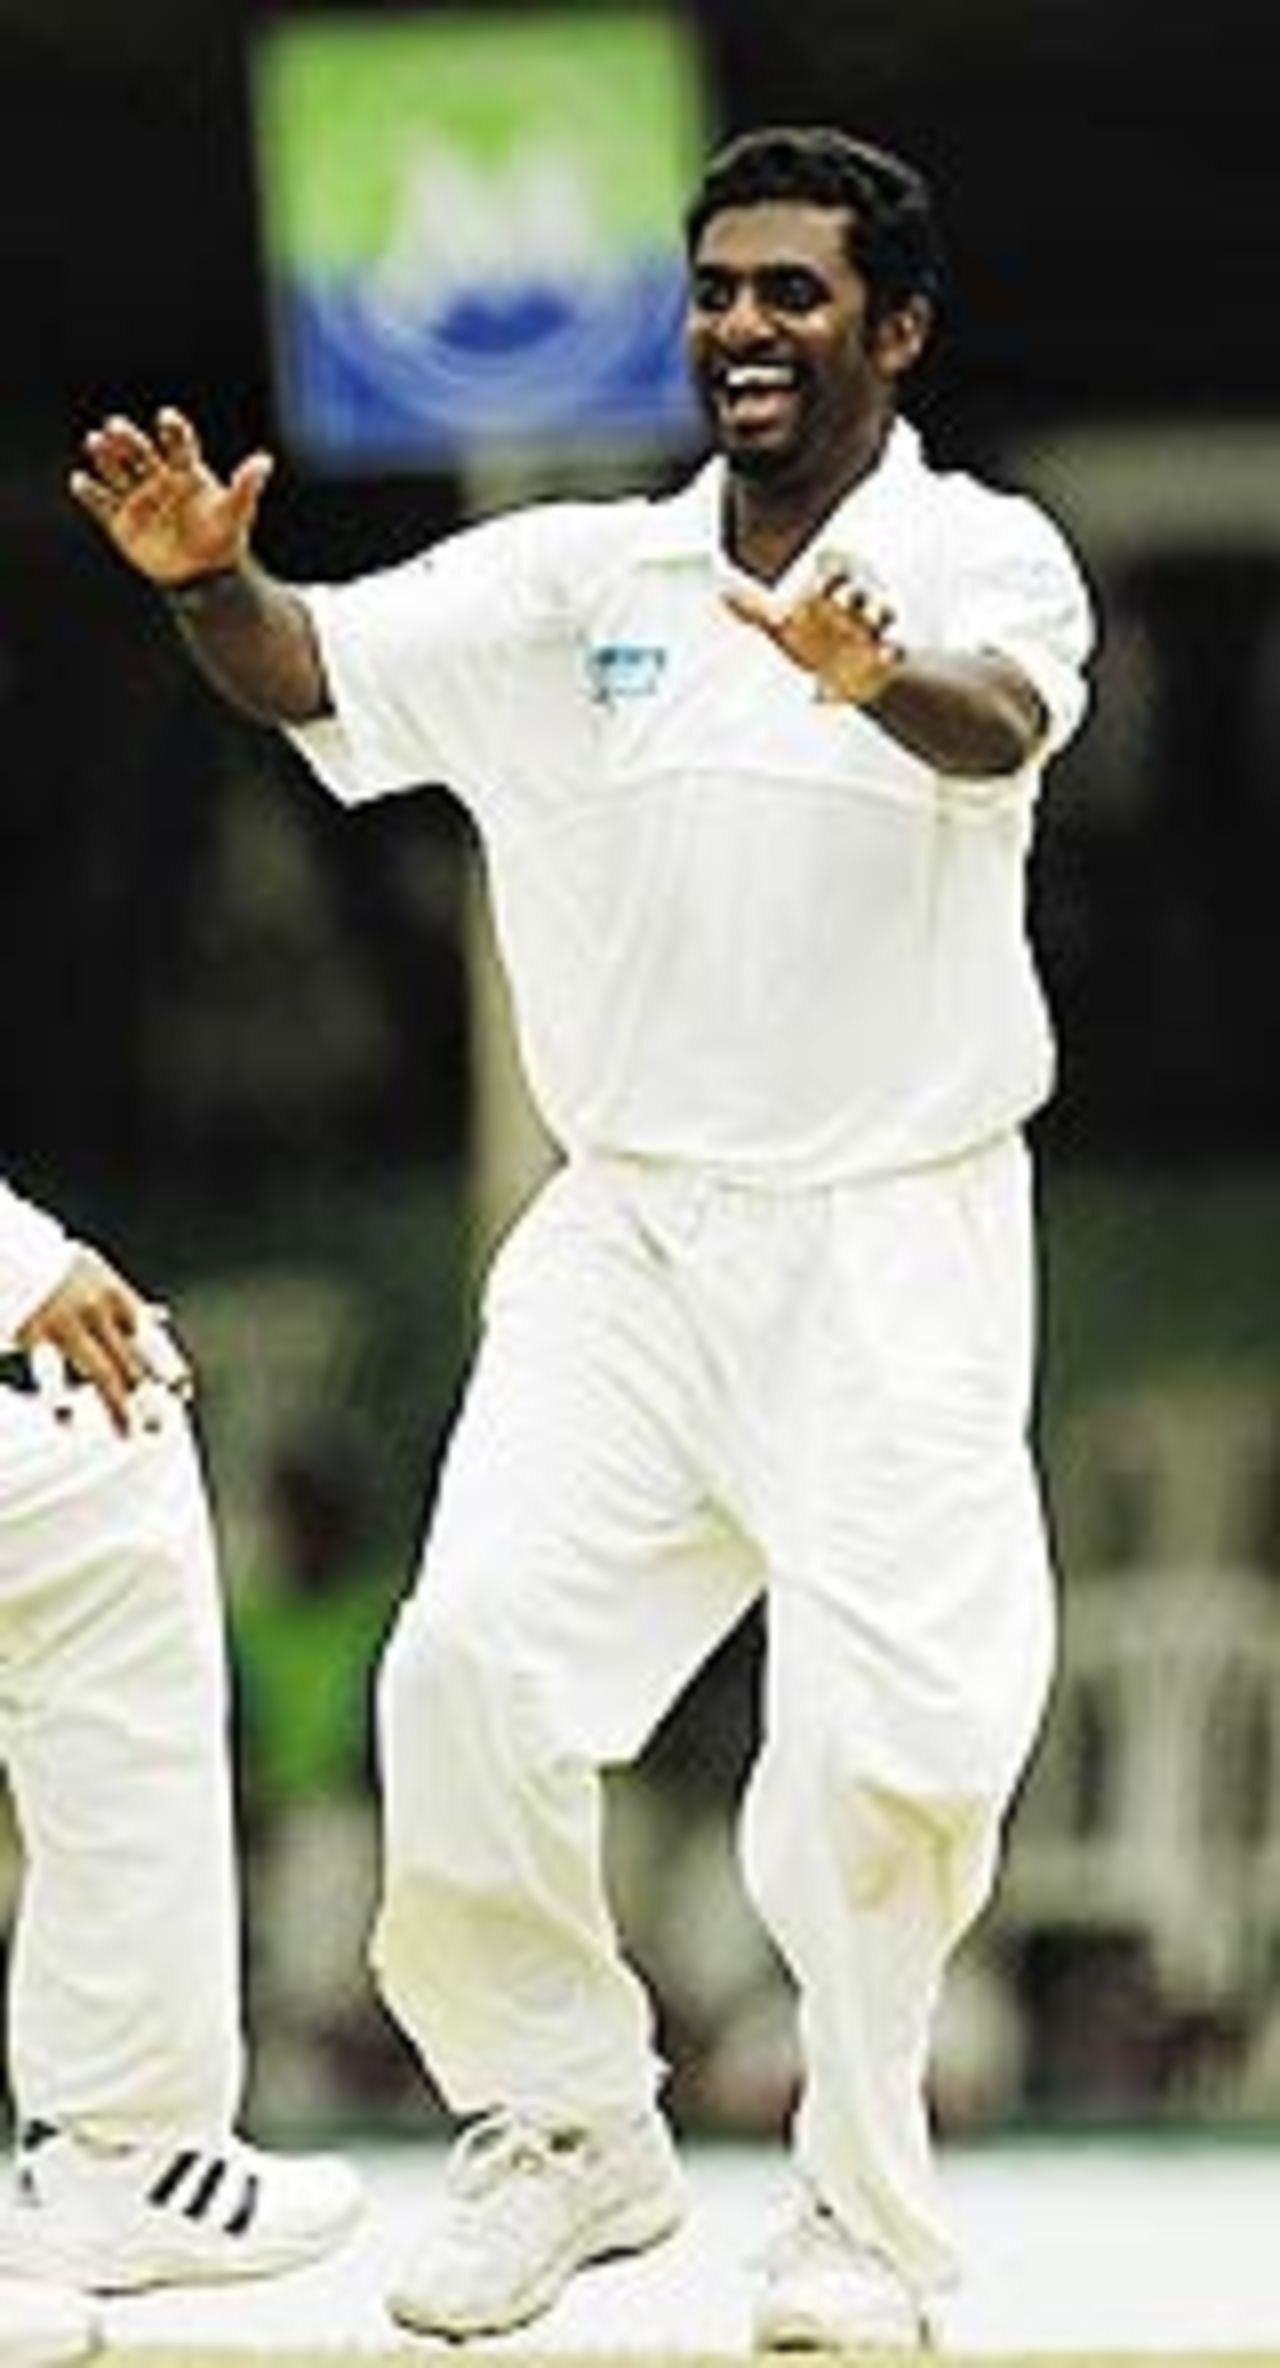 Muttiah Muralitharan is ecstatic after picking up his 500th Test wicket, Sri Lanka v Australia, 2nd Test, Kandy, 1st day, March 16, 2004